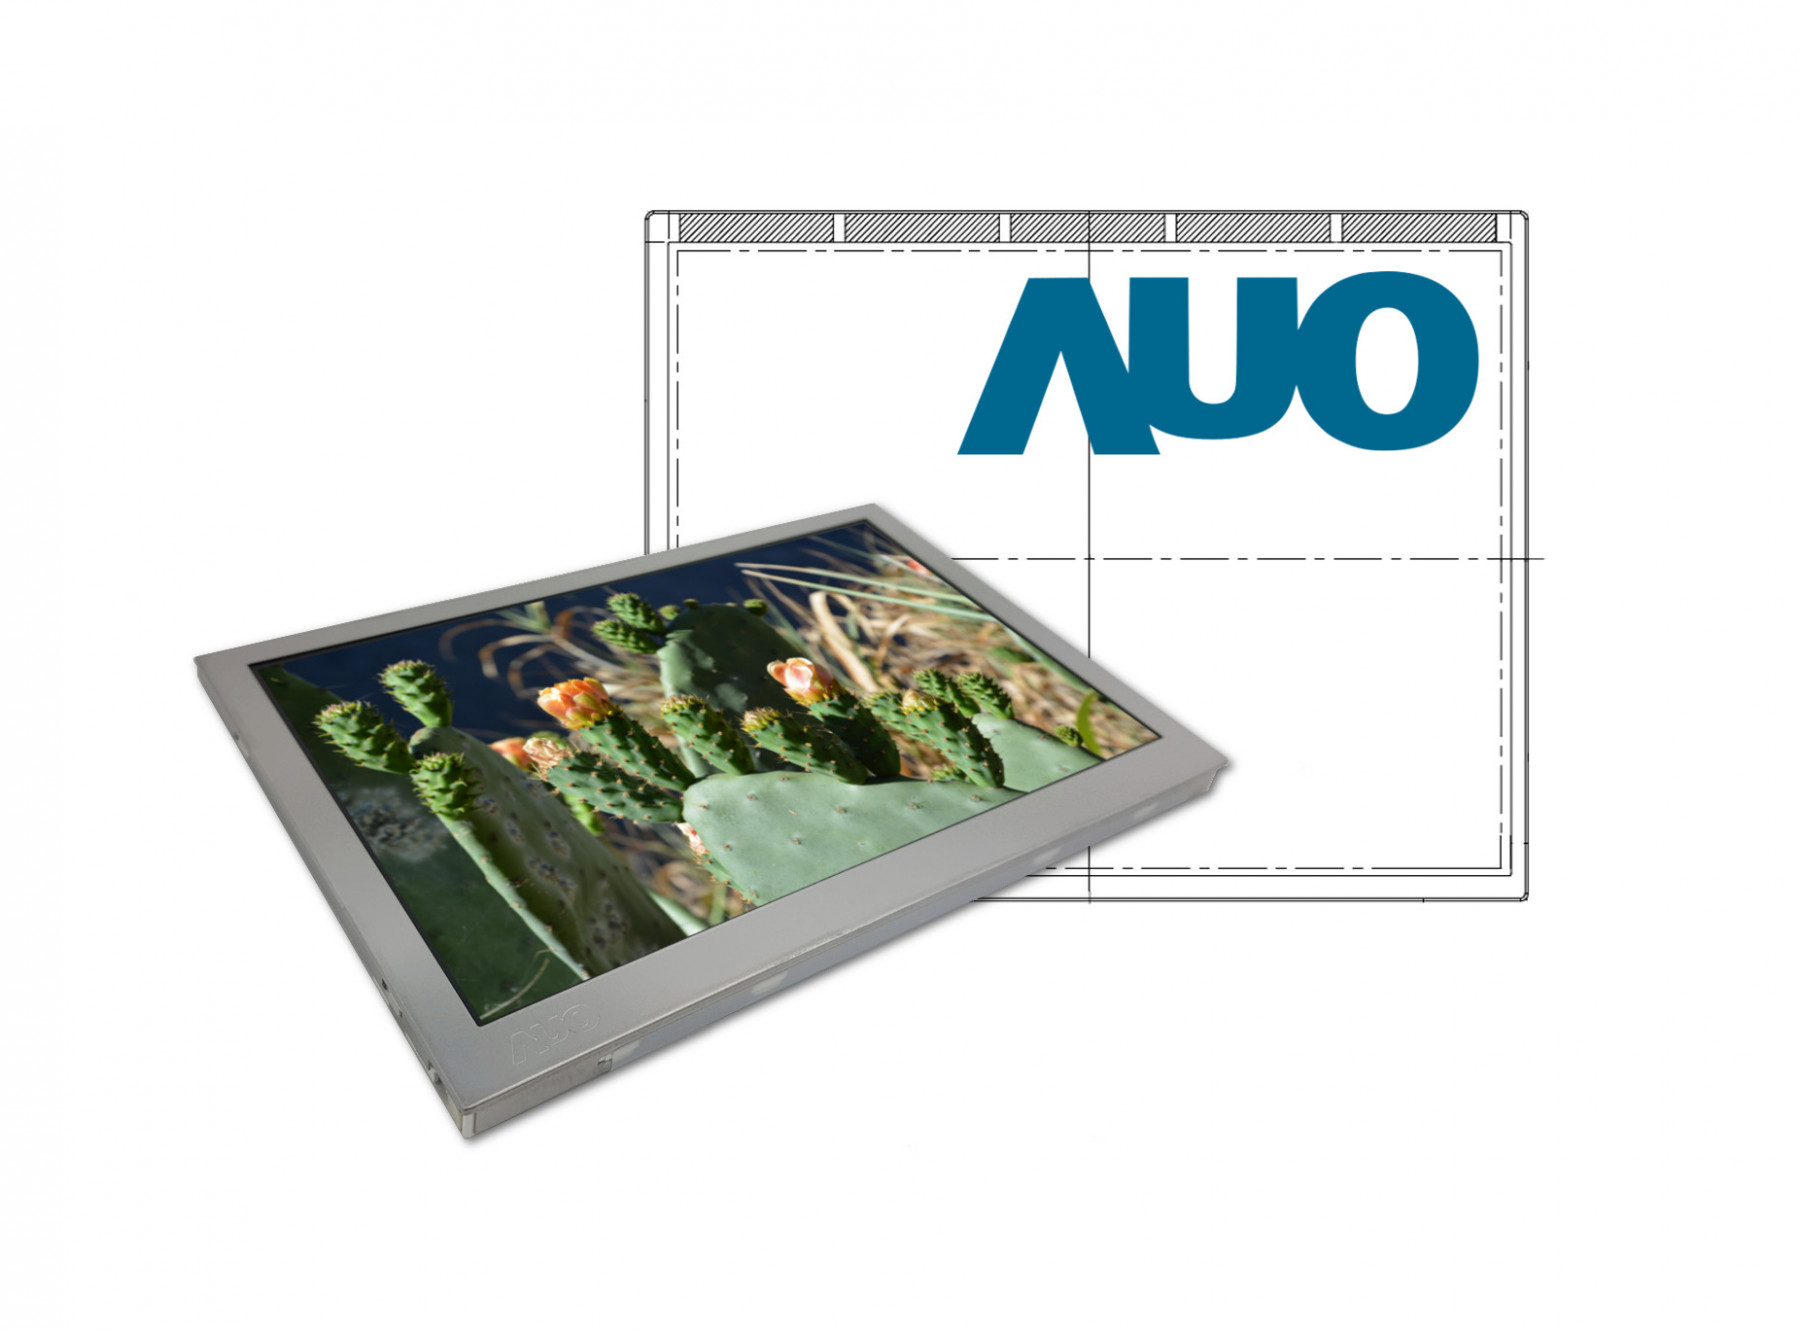 RisingLCD 24 inch 1920*1200 IPS AUO display G240UAN01.0 lcd panel with 900 cd/m2 sunlight readable